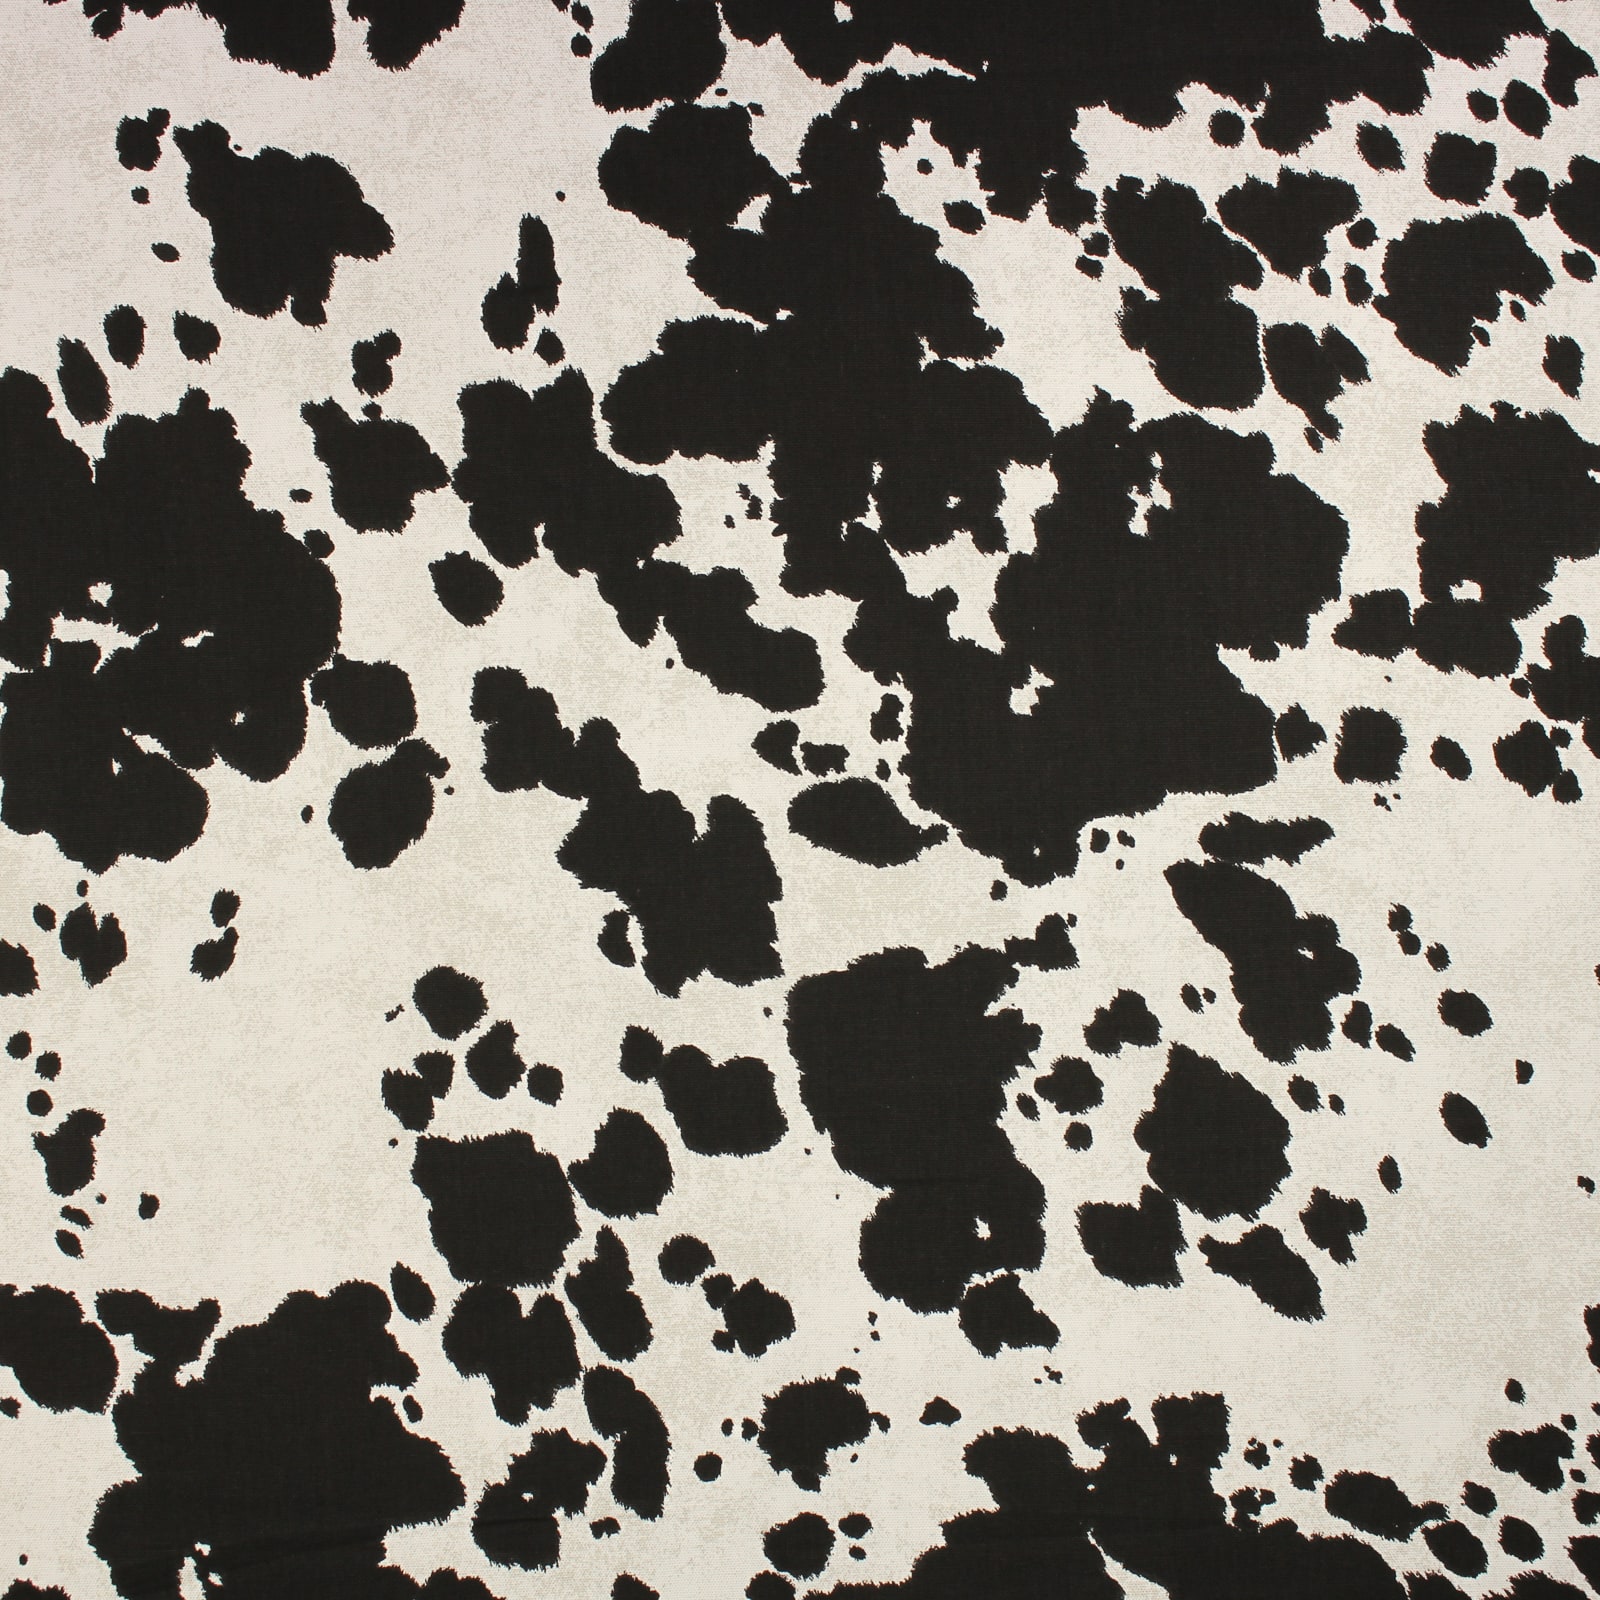 Find The Richloom Black Cowhide Cotton Home Decor Fabric At